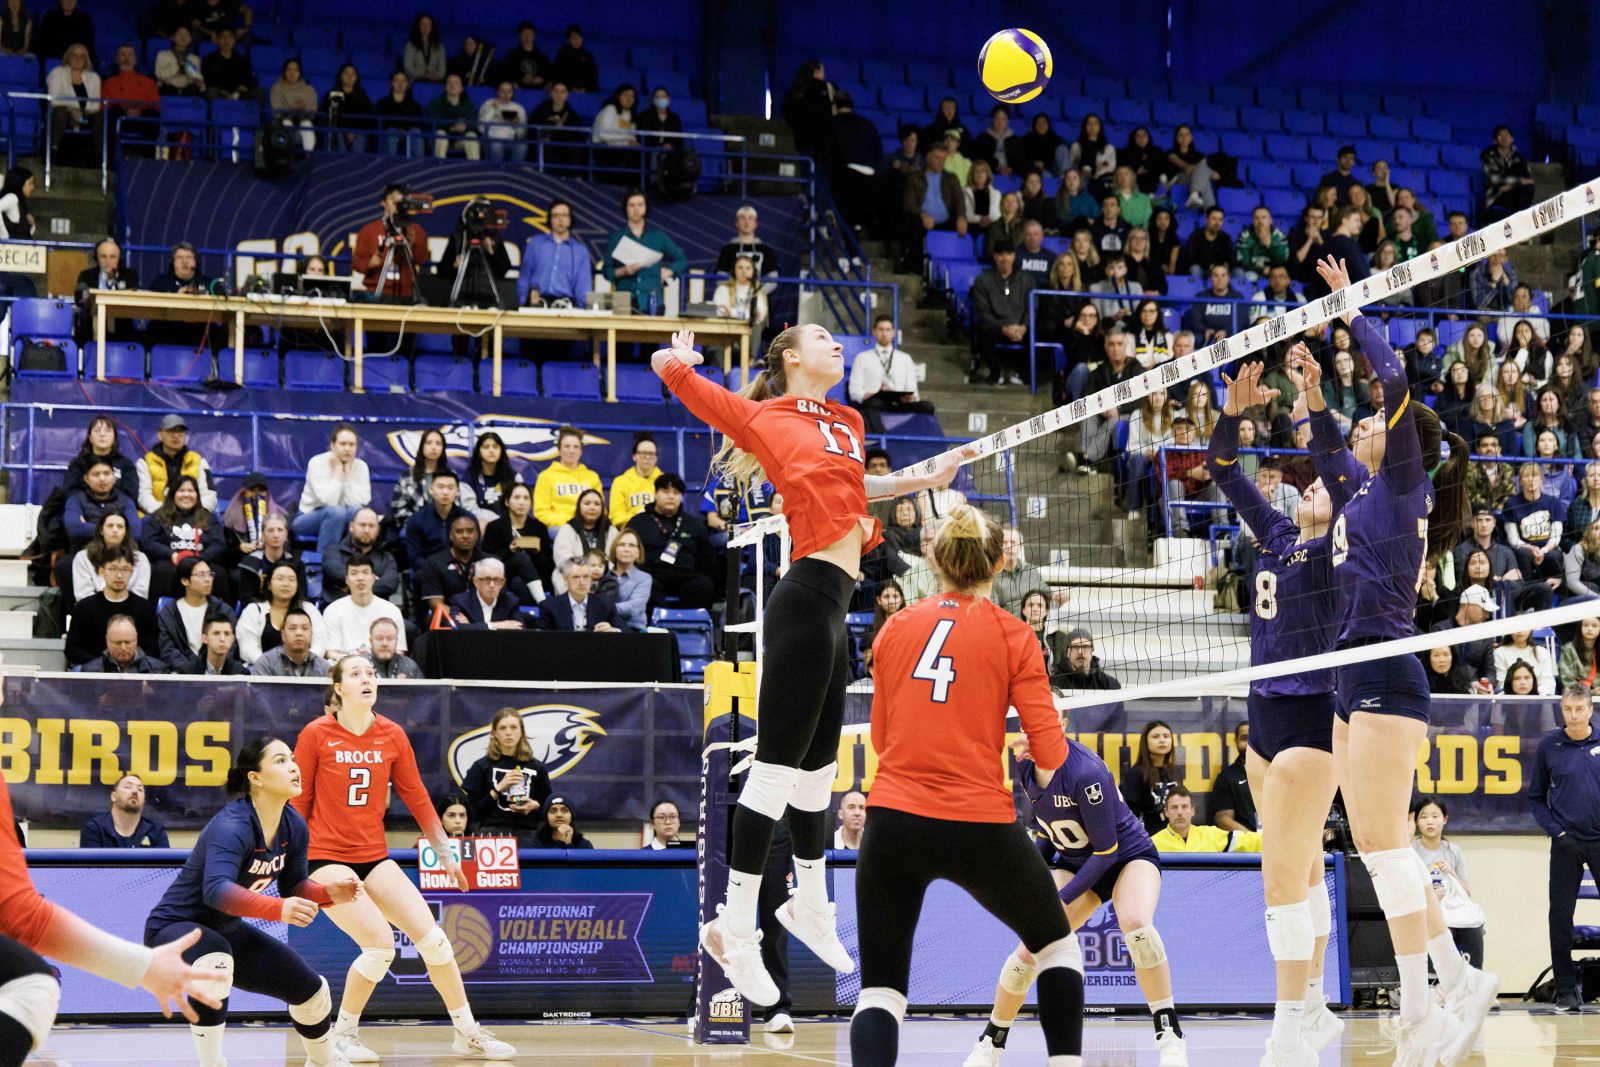 A woman jumps to strike a volleyball indoors.